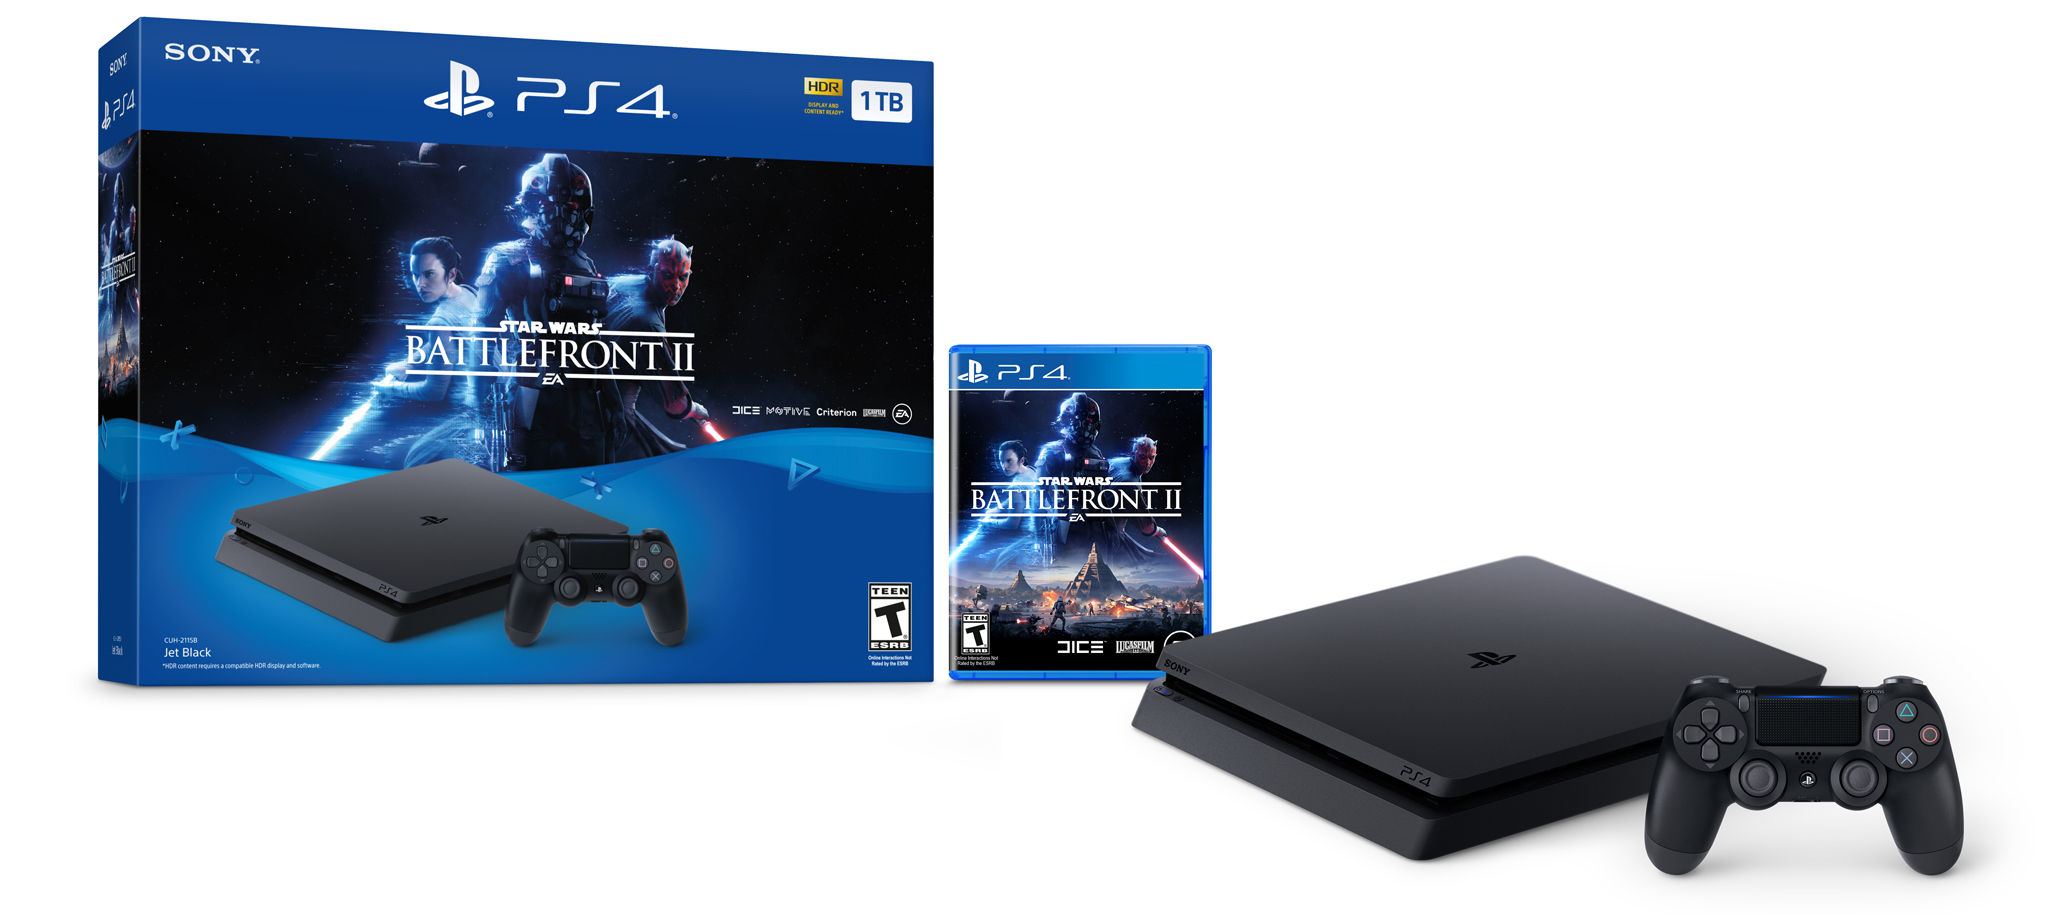 Sony debuts mirror-finish Star Wars Battlefront 2 PS4 Pro console